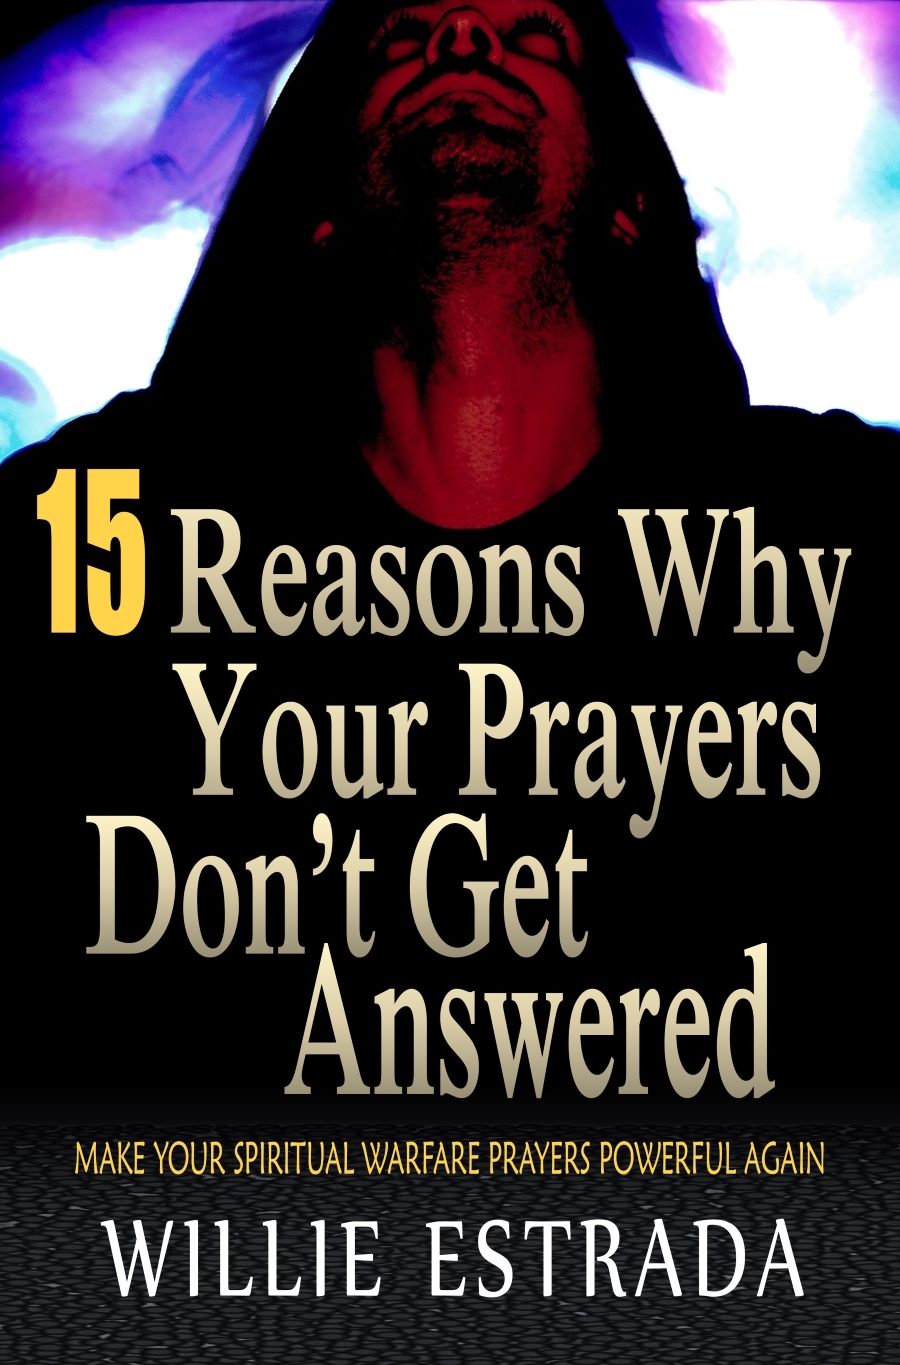 FREE: 15 Reasons Why Your Prayers Don’t Get Answered by Willie Estrada